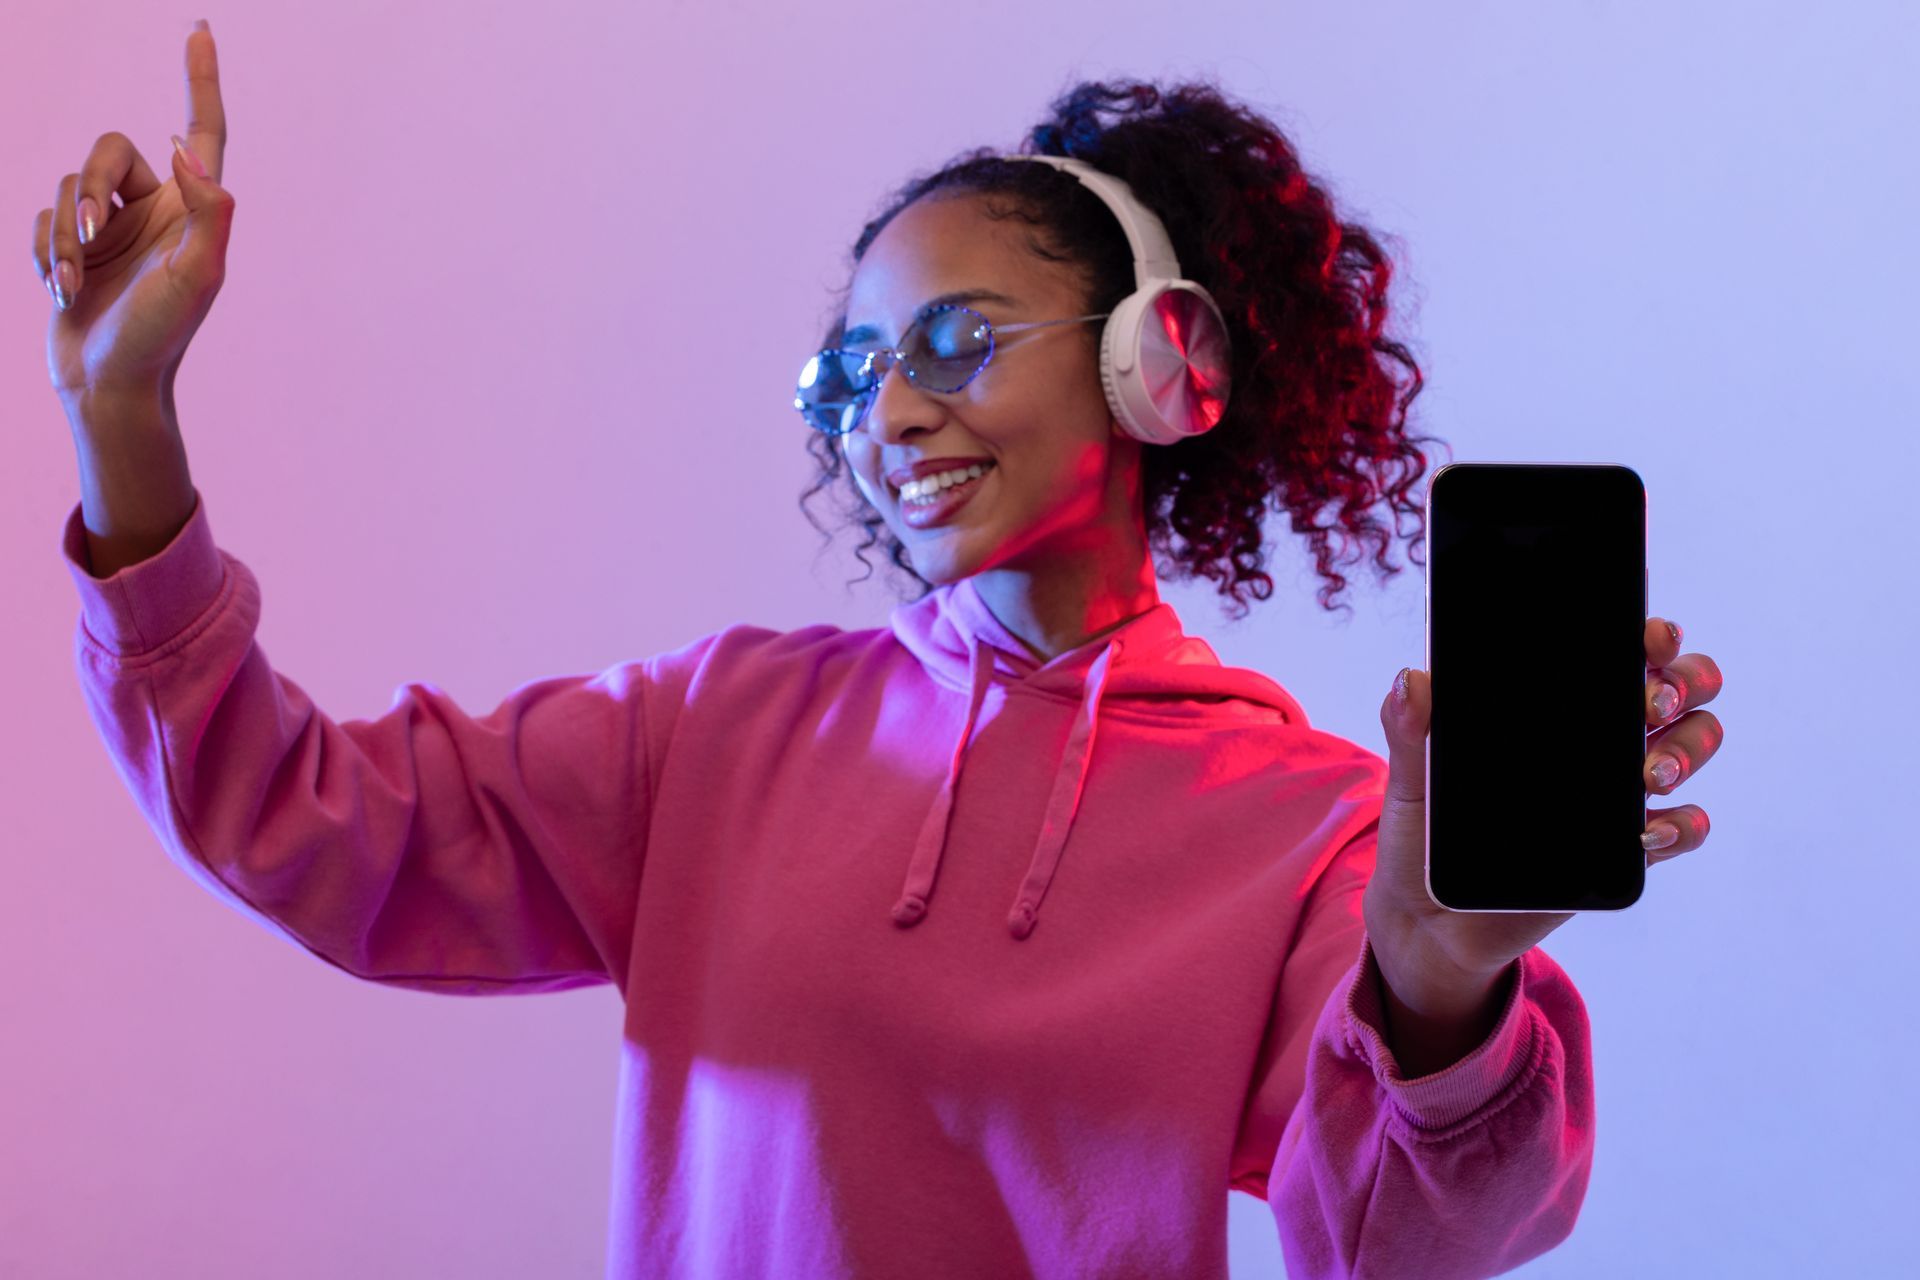 happy lady dancing with phone and headphones